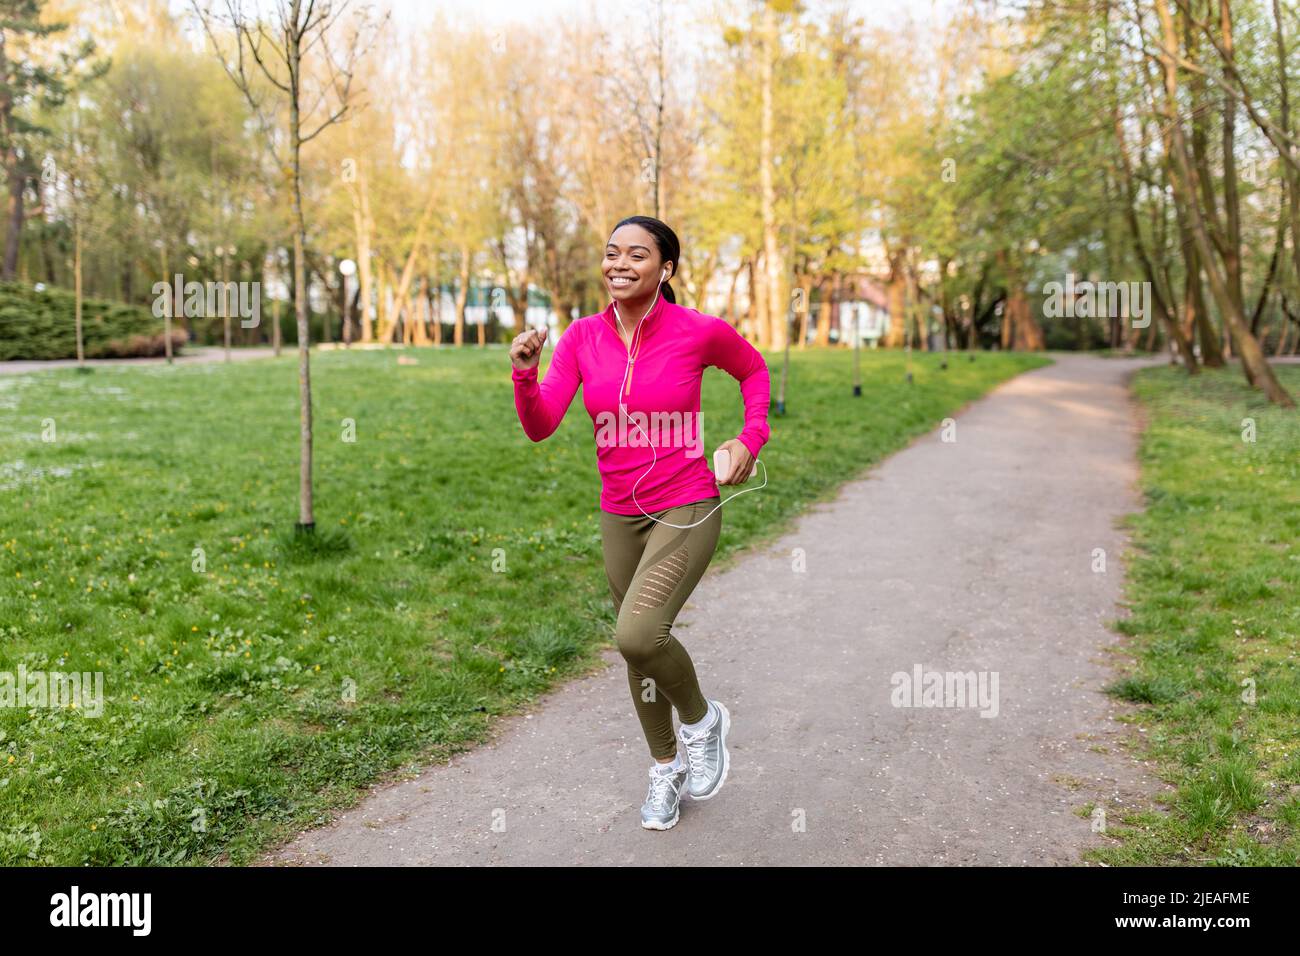 Young Female Runner in Jogging Outfit during Her Regular Training Exercises  Outdoors Stock Photo - Image of healthy, lifestyle: 197648298